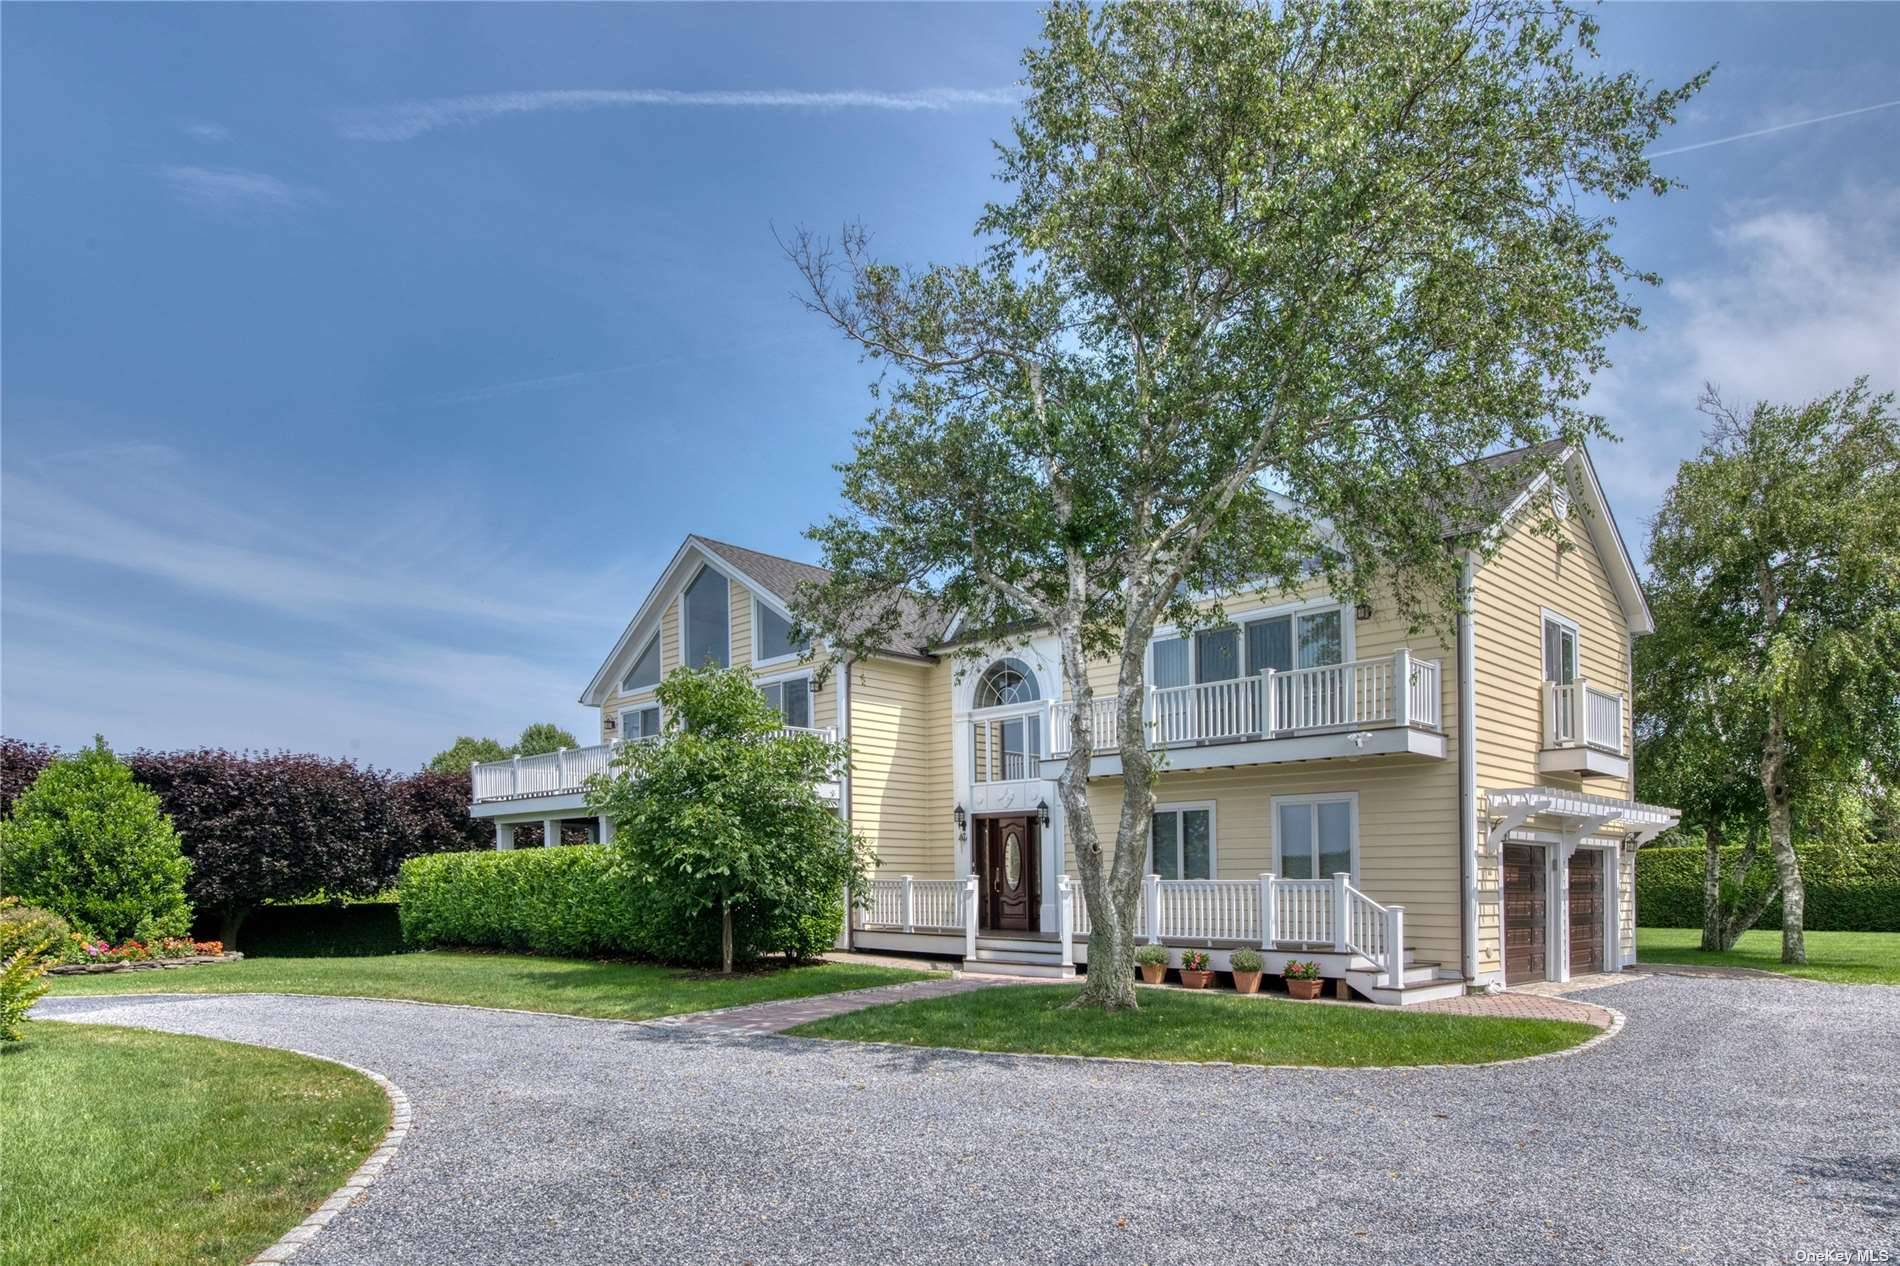 This bright and airy Orient estate, nestled in a quiet secluded neighborhood, offers extensive breath taking water views of the Long Island Sound.